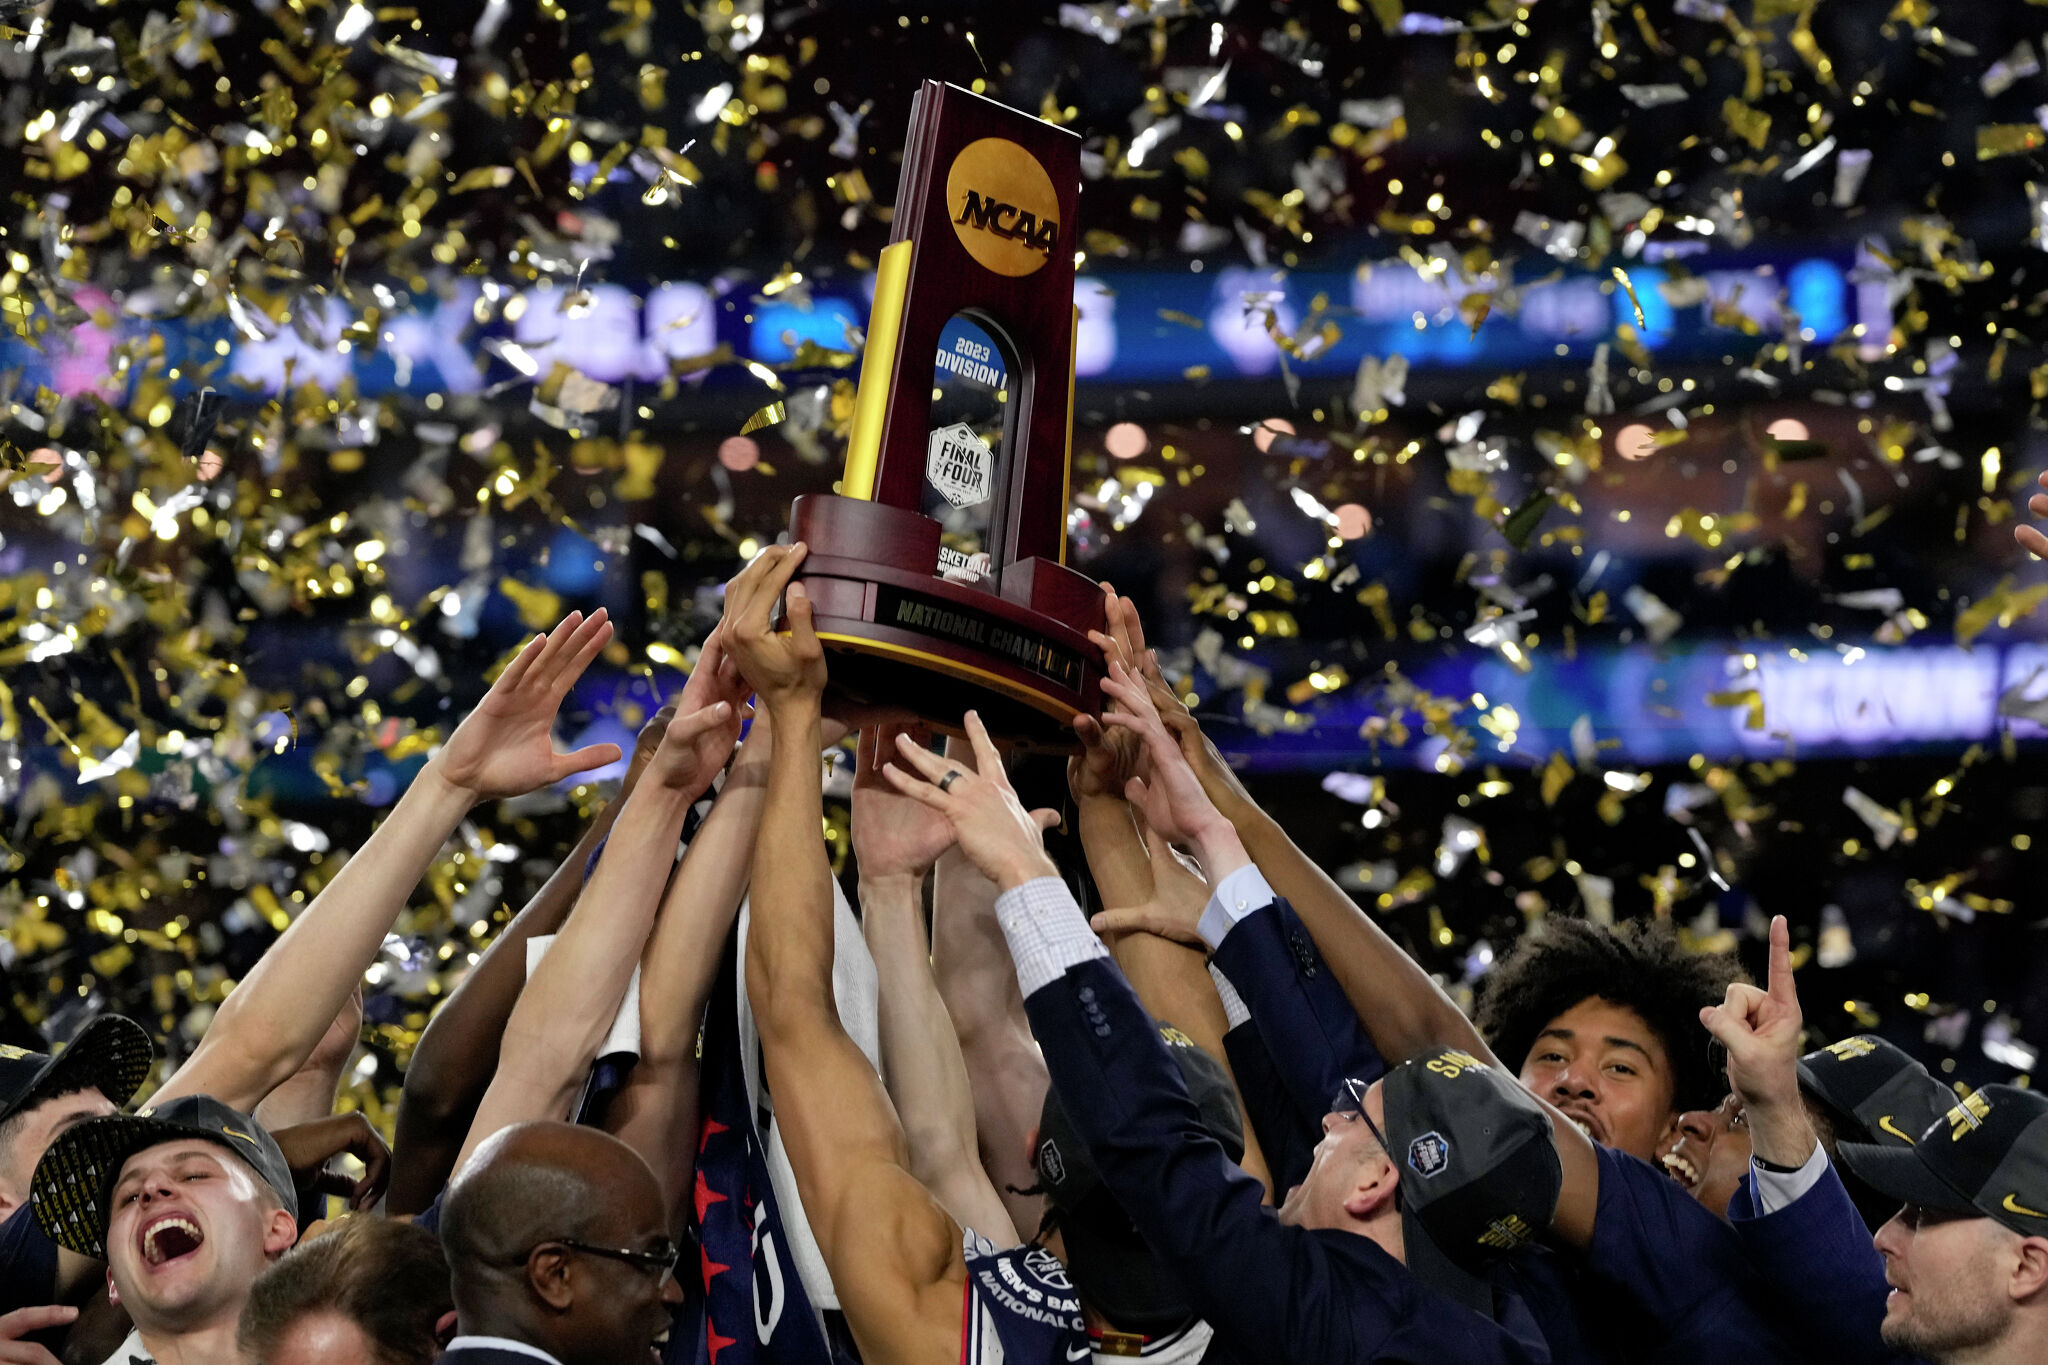 college basketball trophy